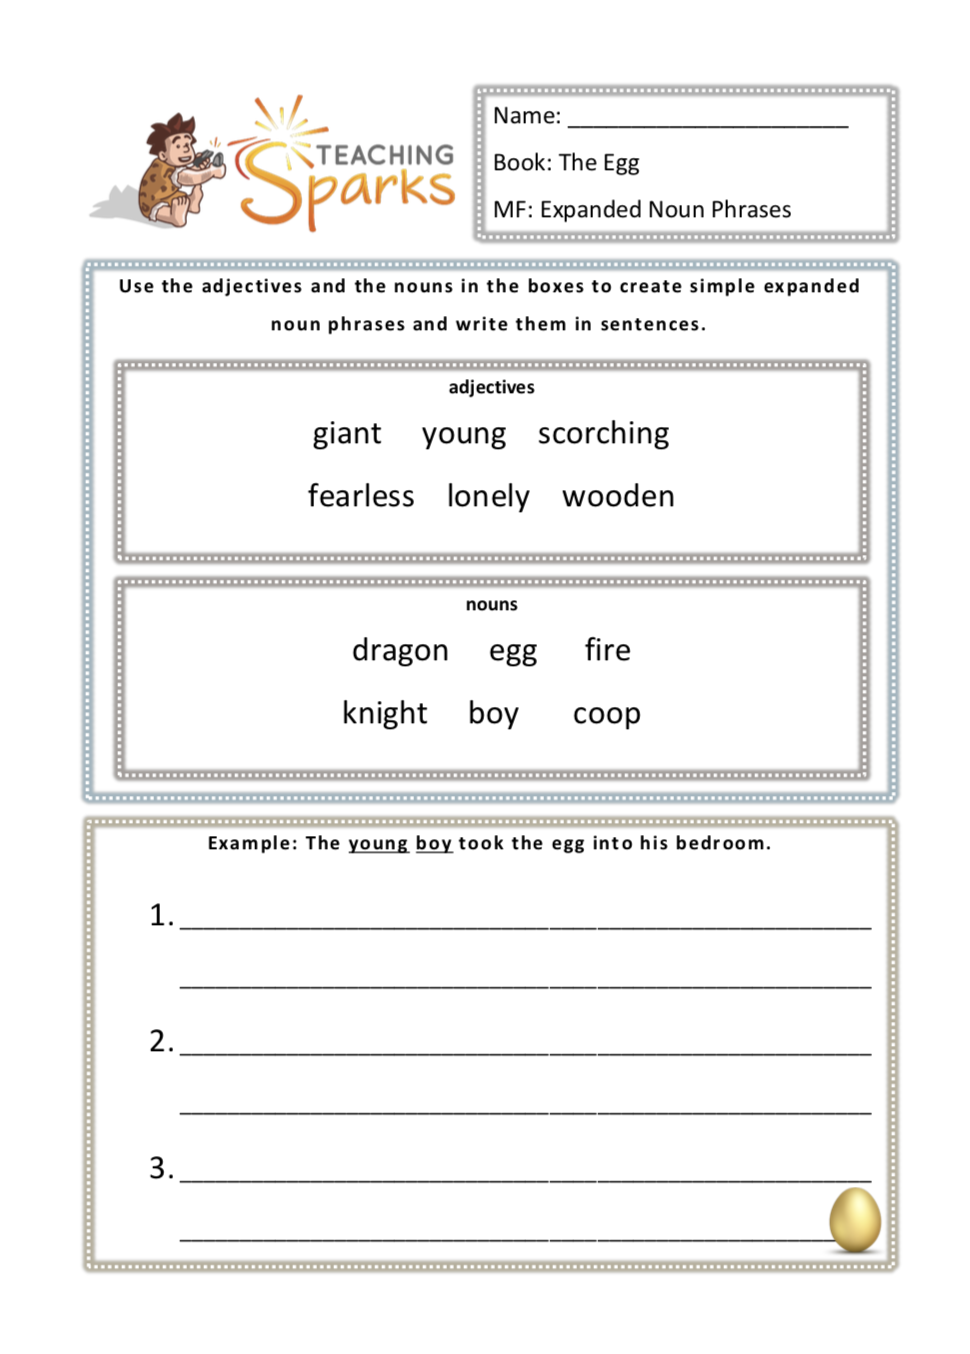 the-egg-book-guided-reading-ks1-book-resources-year-1-year-2